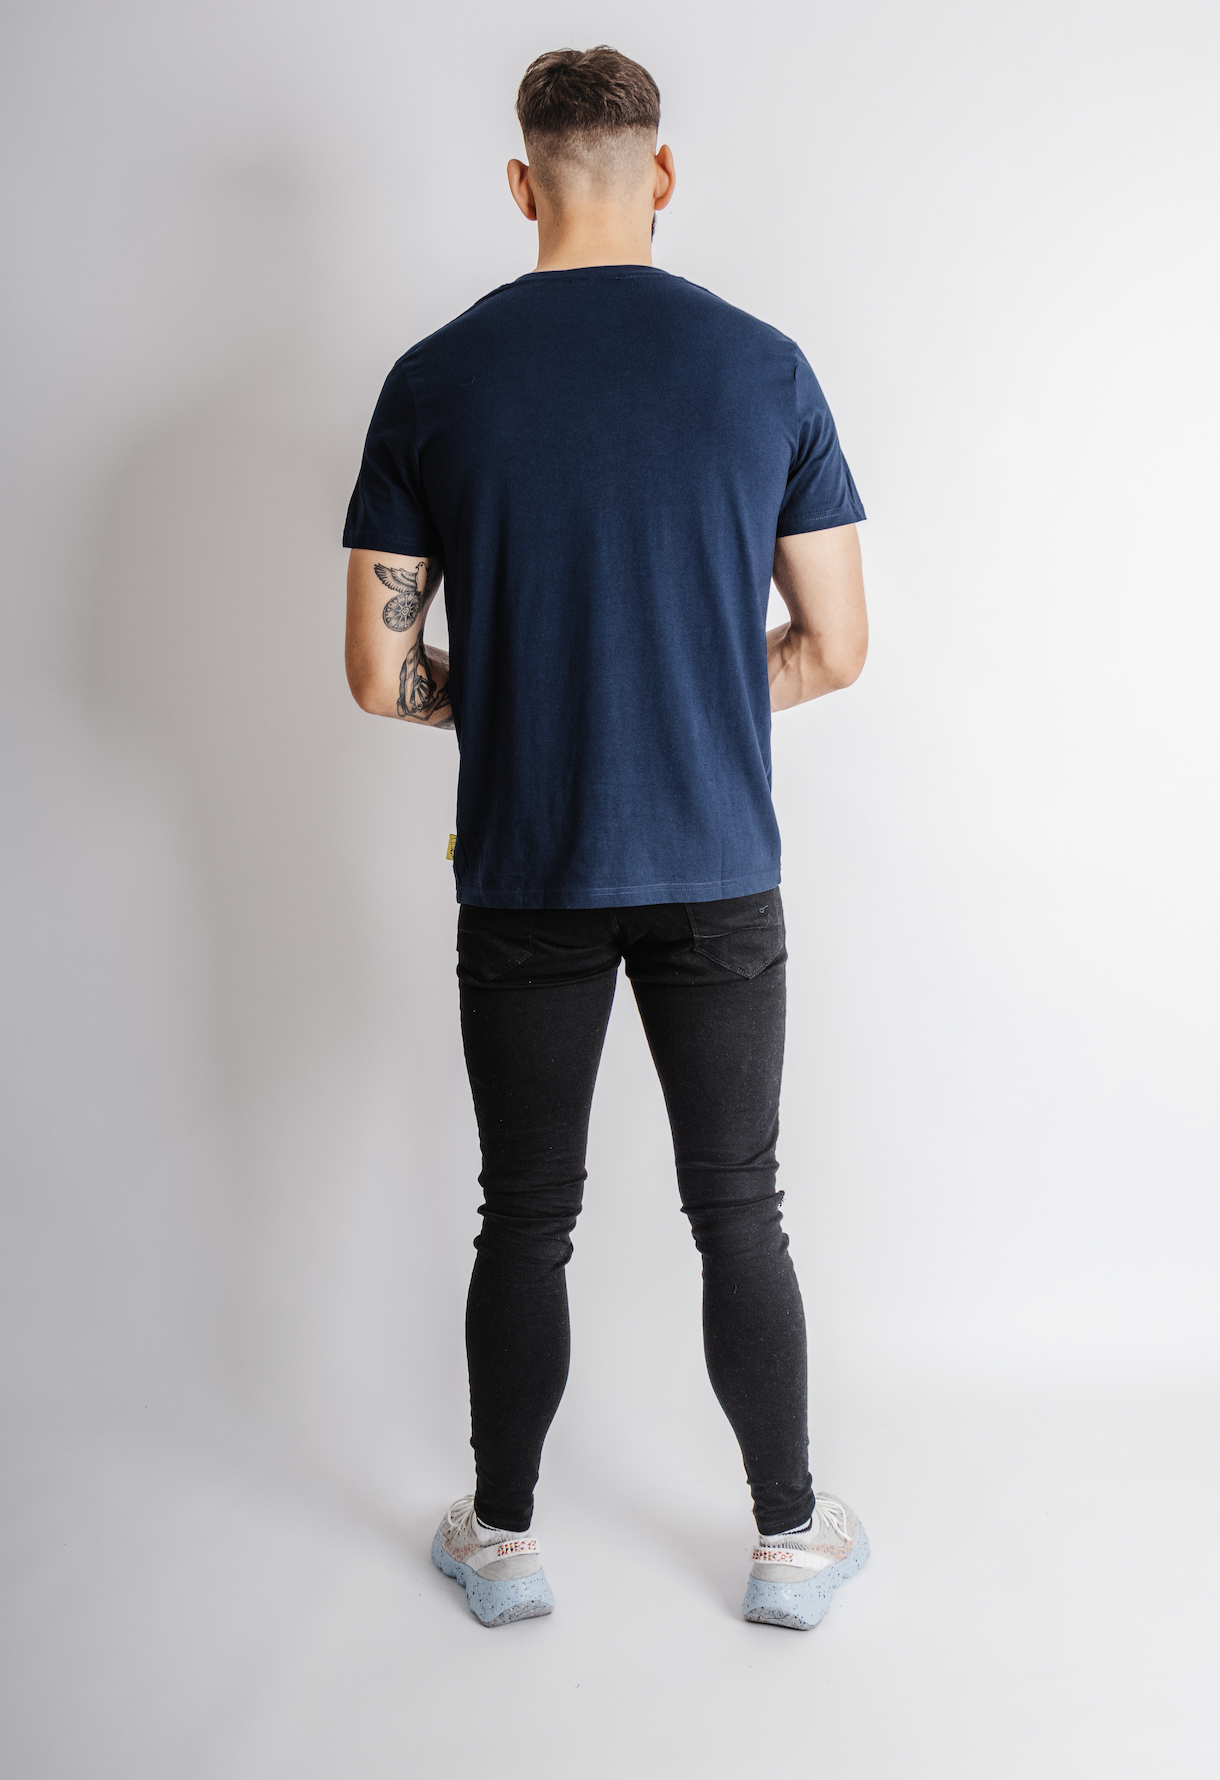 'Paradise' navy t-shirt - normal fit